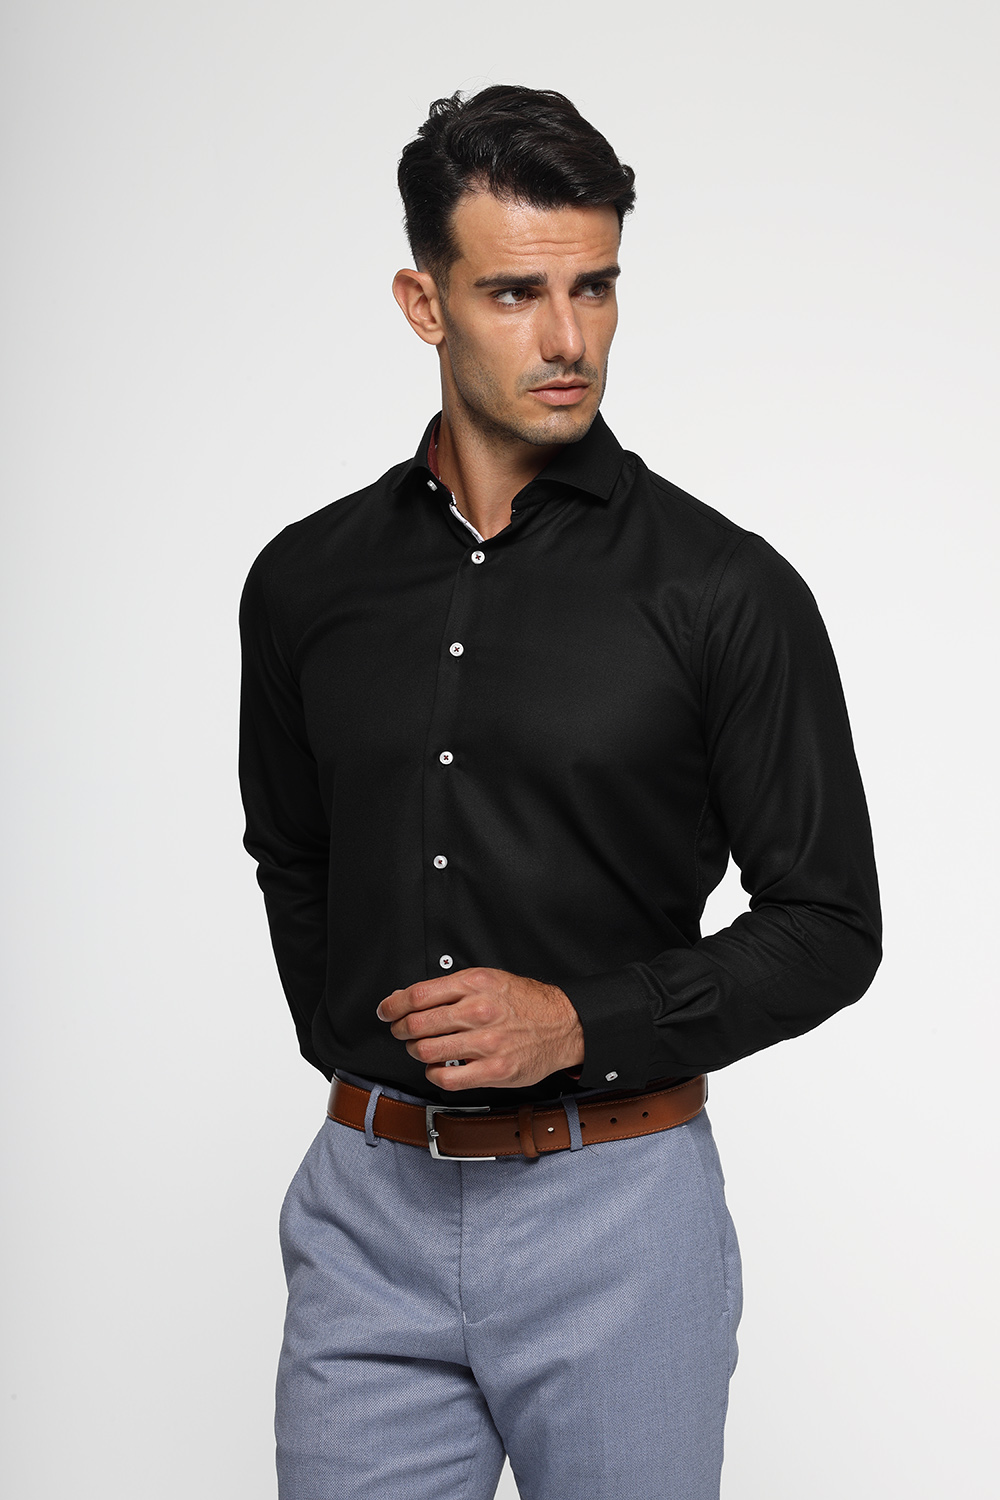 New Fit Shirt Black - TIE HOUSE